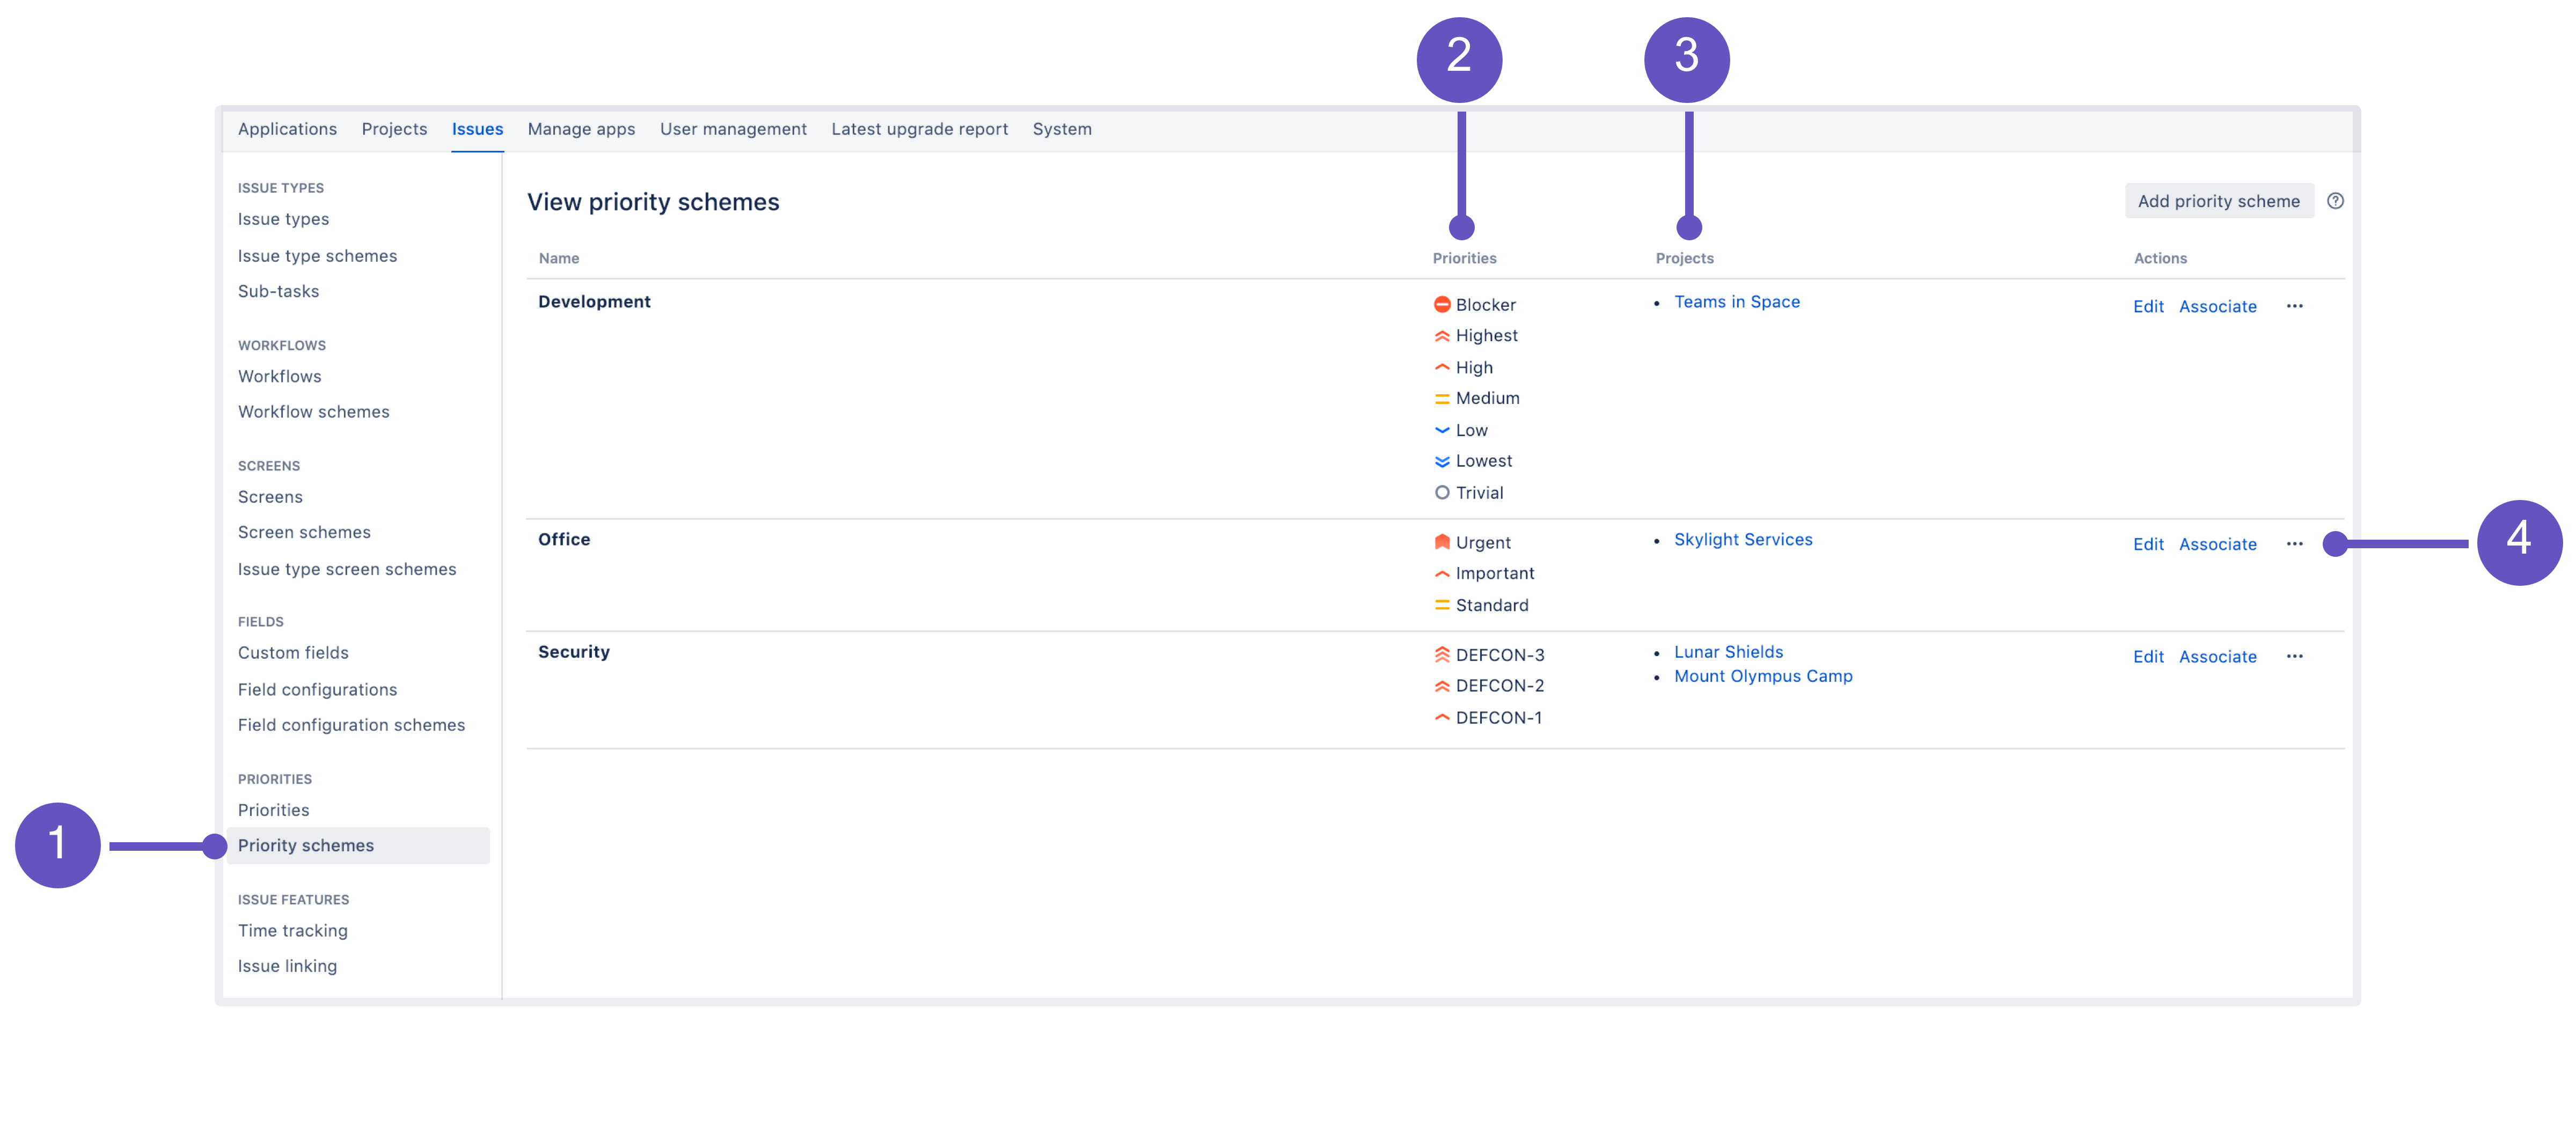 Priority schemes in Jira admin console, with annotations explained below the image.